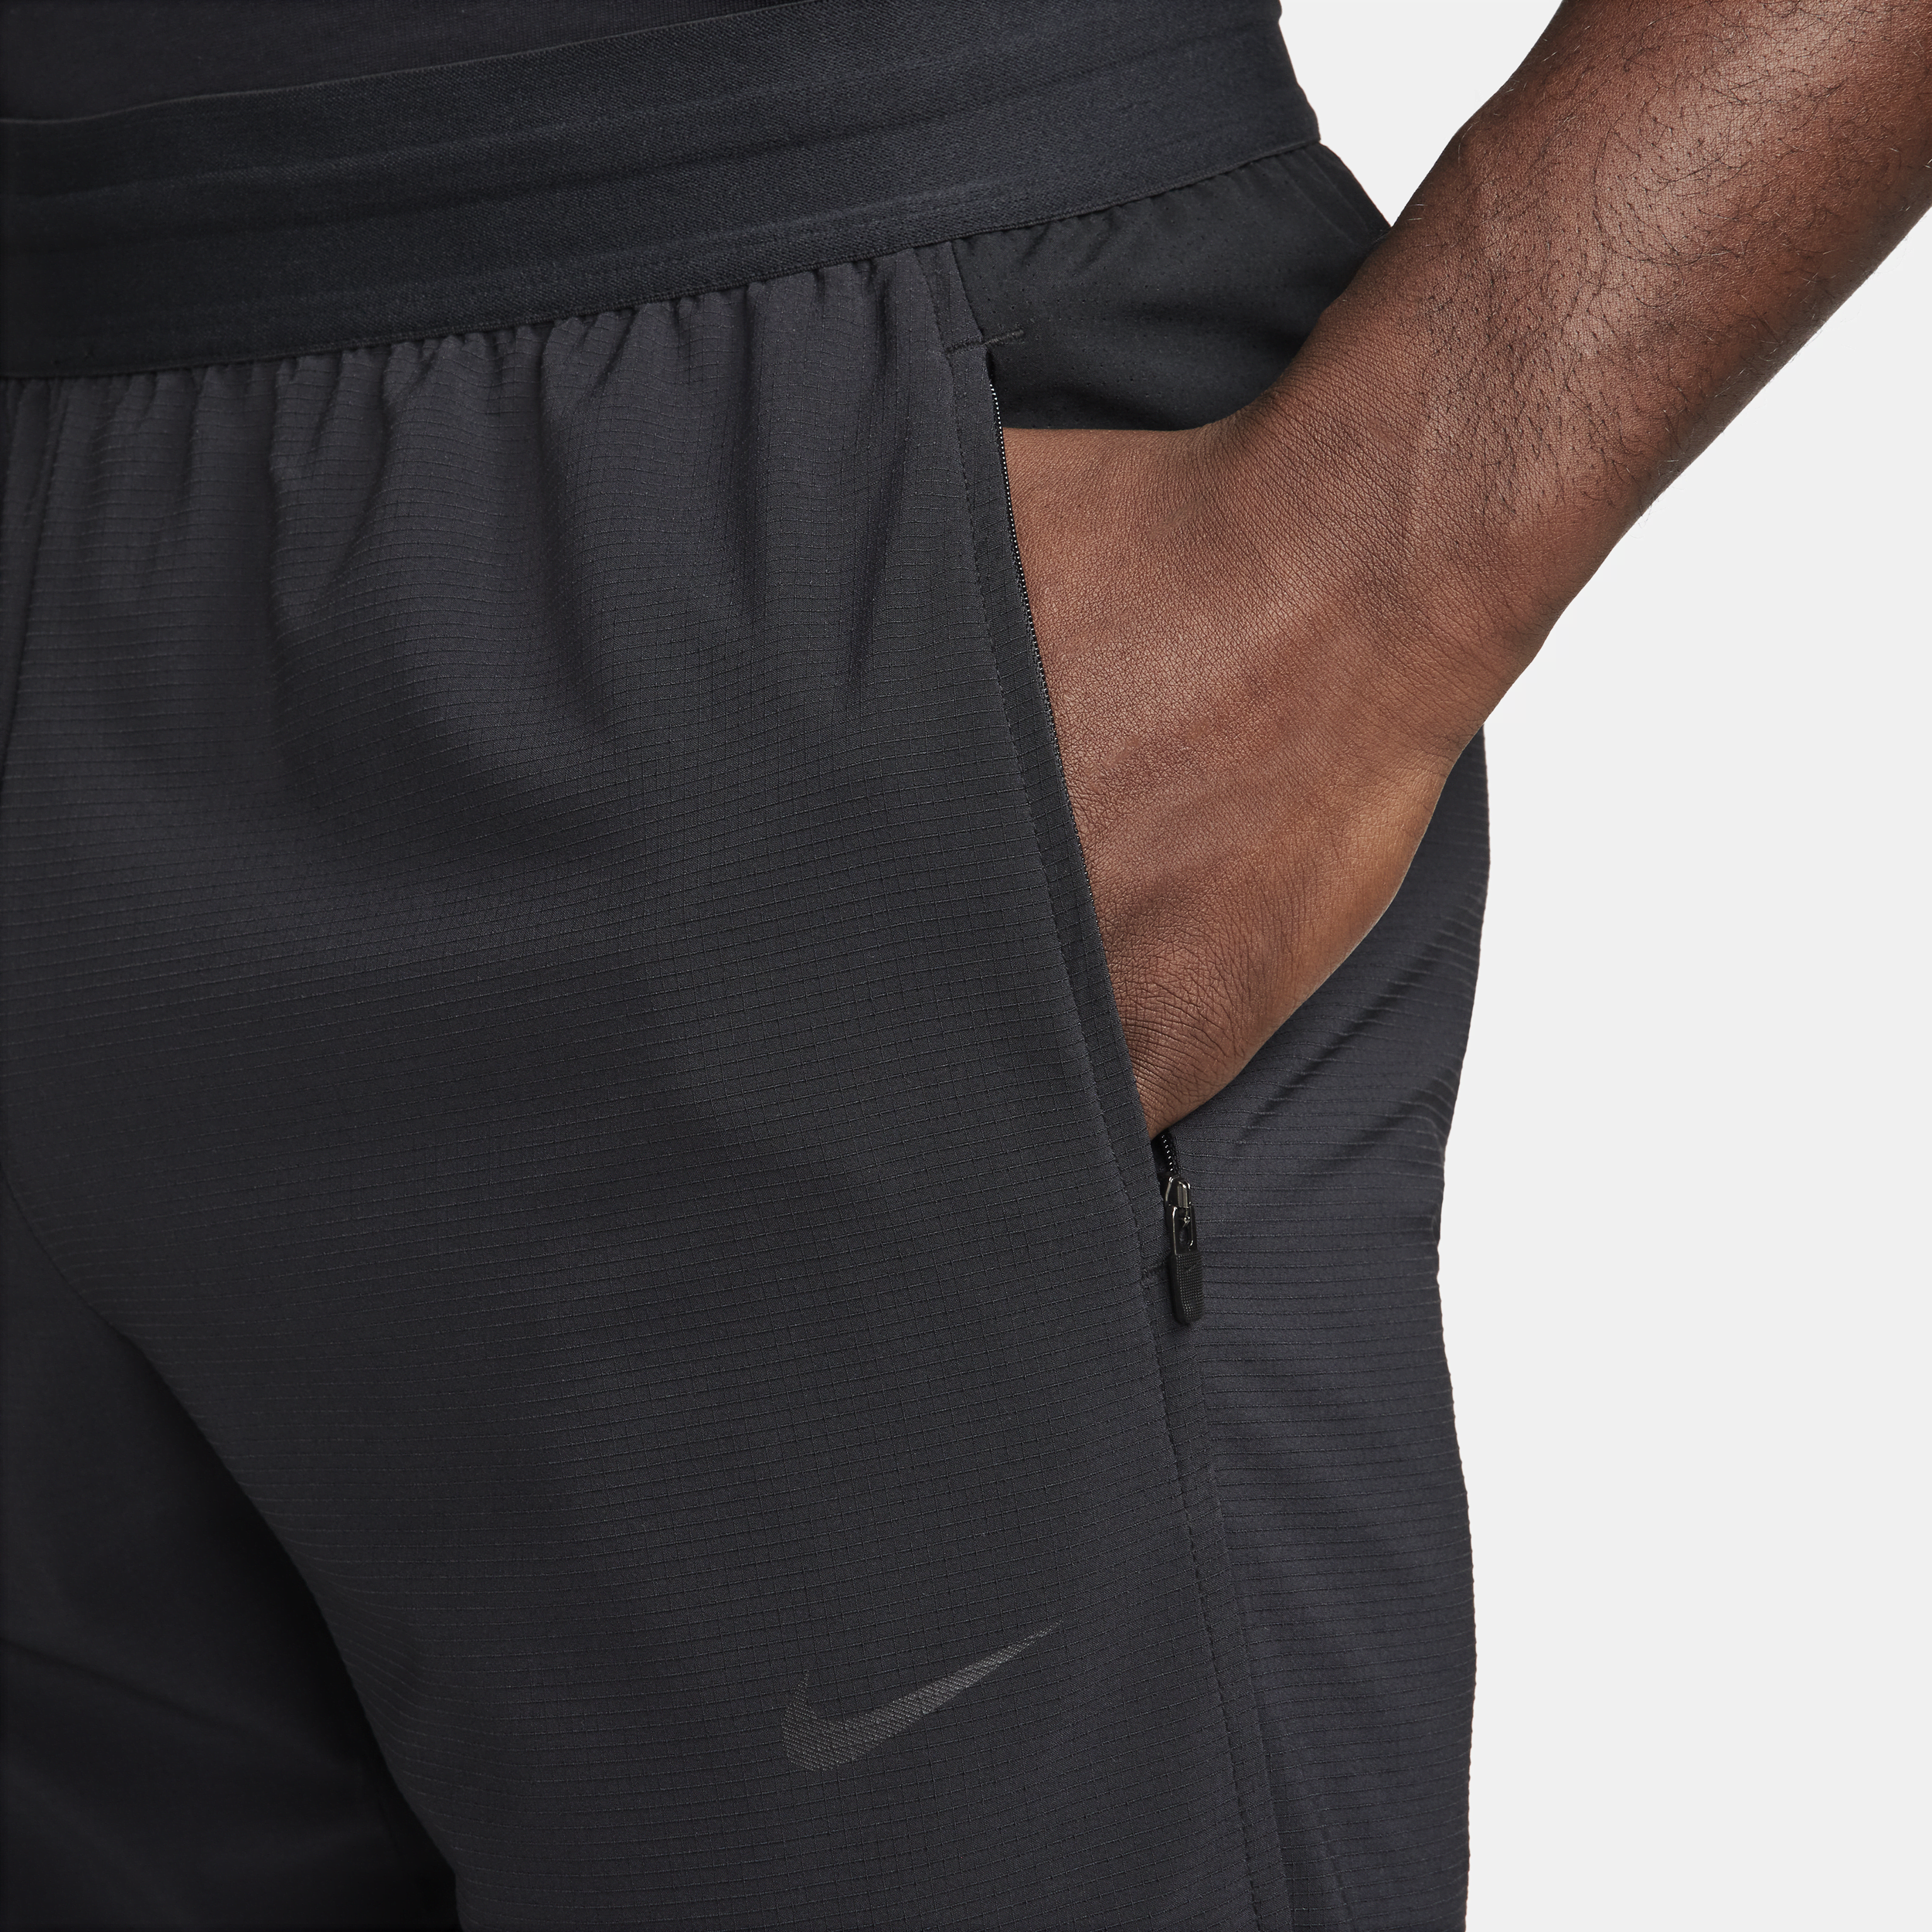 Buy Nike Dri-FIT Challenger Pants (DD4894-084) grey from £39.99 (Today) –  Best Deals on idealo.co.uk